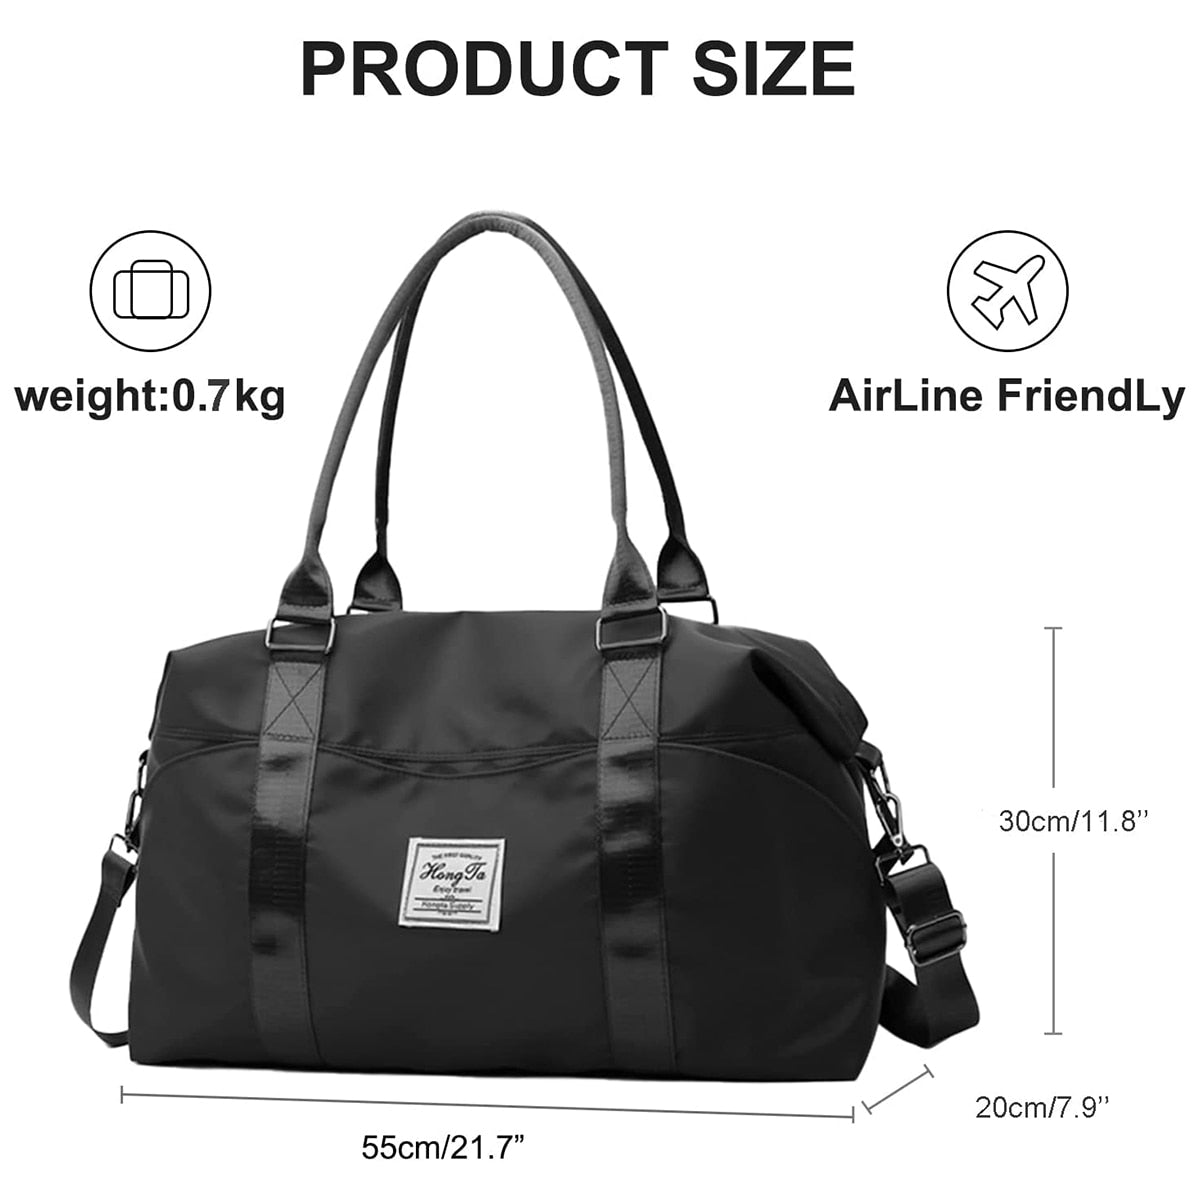 33L Travel Duffle Bag Dry and Wet Separation Sports Gym Bag Weekend Overnight Bag Carry On Hand Luggage Cabin Bag Waterproof - adamshealthstore